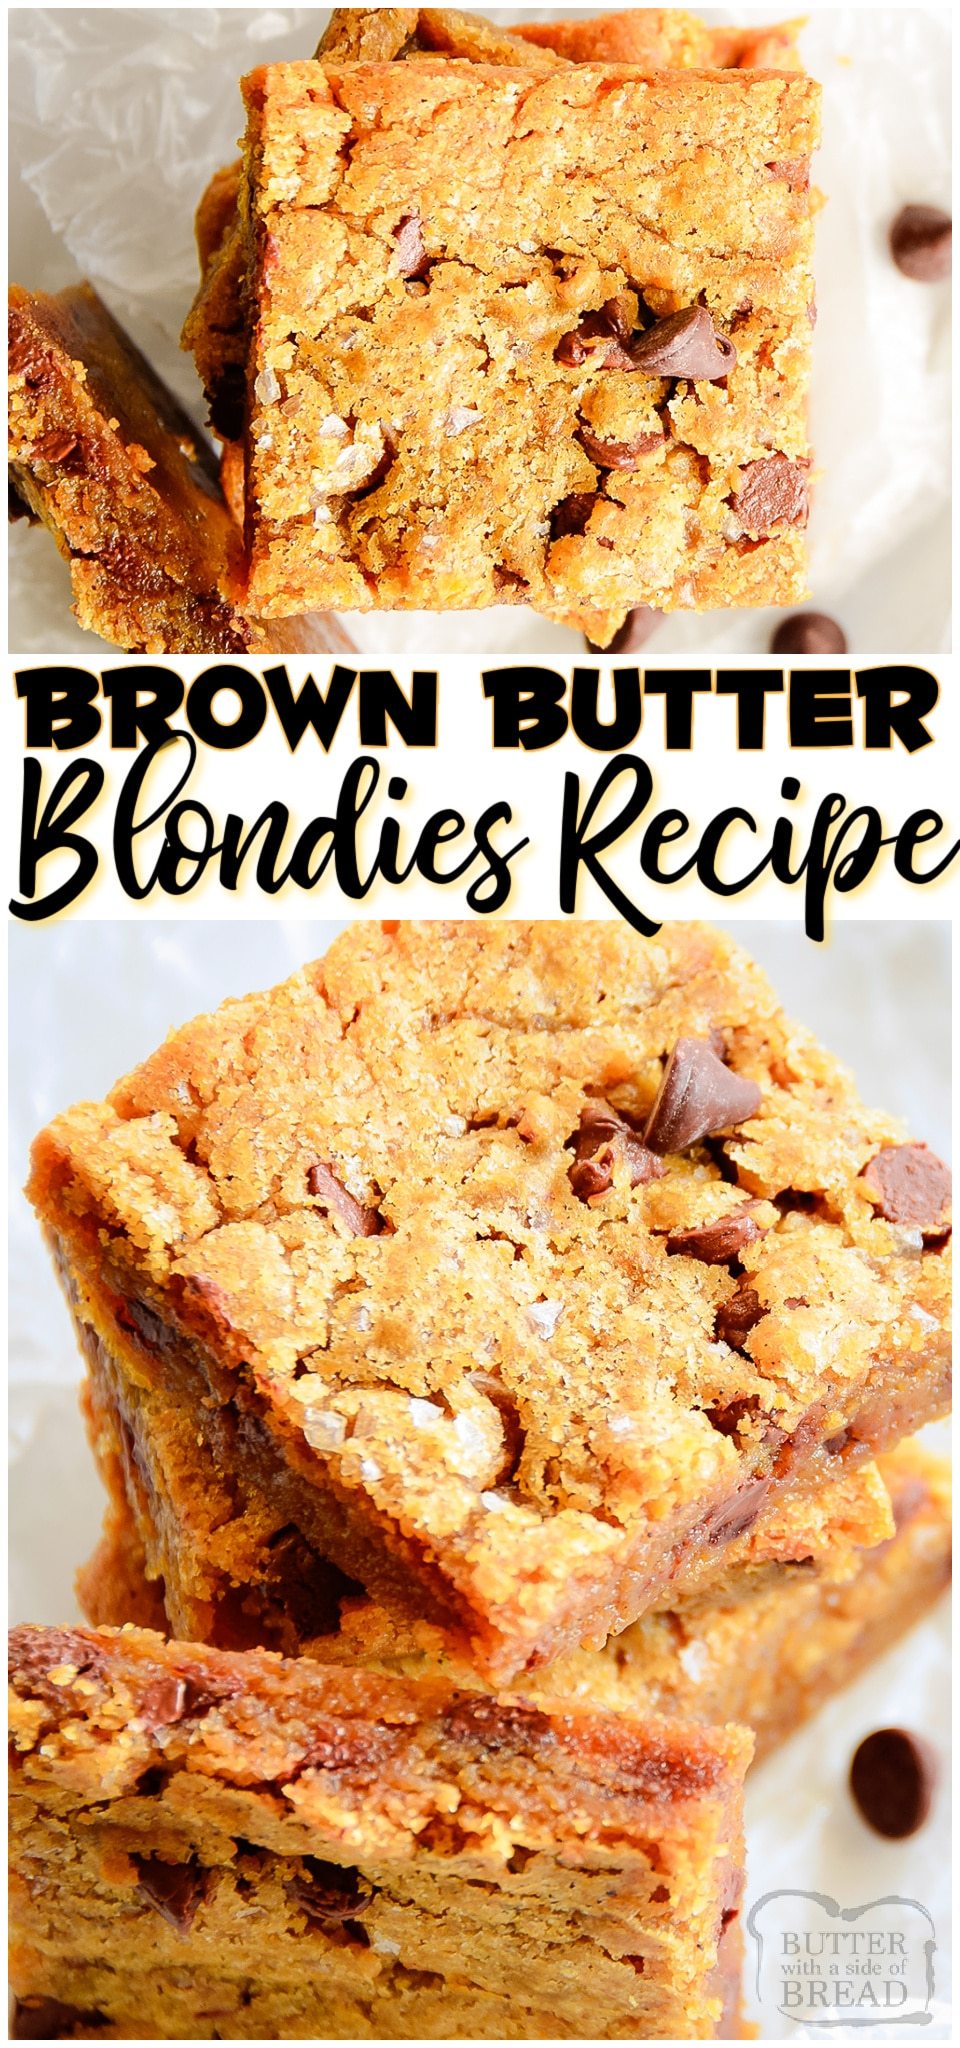 Brown Butter Blondies made with nutty browned butter, brown sugar & classic ingredients for a rich, flavorful blonde brownie recipe! Chocolate Chips & sea salt combine for a salty sweet flavor in these buttery blondie recipe. #butter #brownbutter #blondies #brownies #recipe #baking #easyrecipe from BUTTER WITH A SIDE OF BREAD